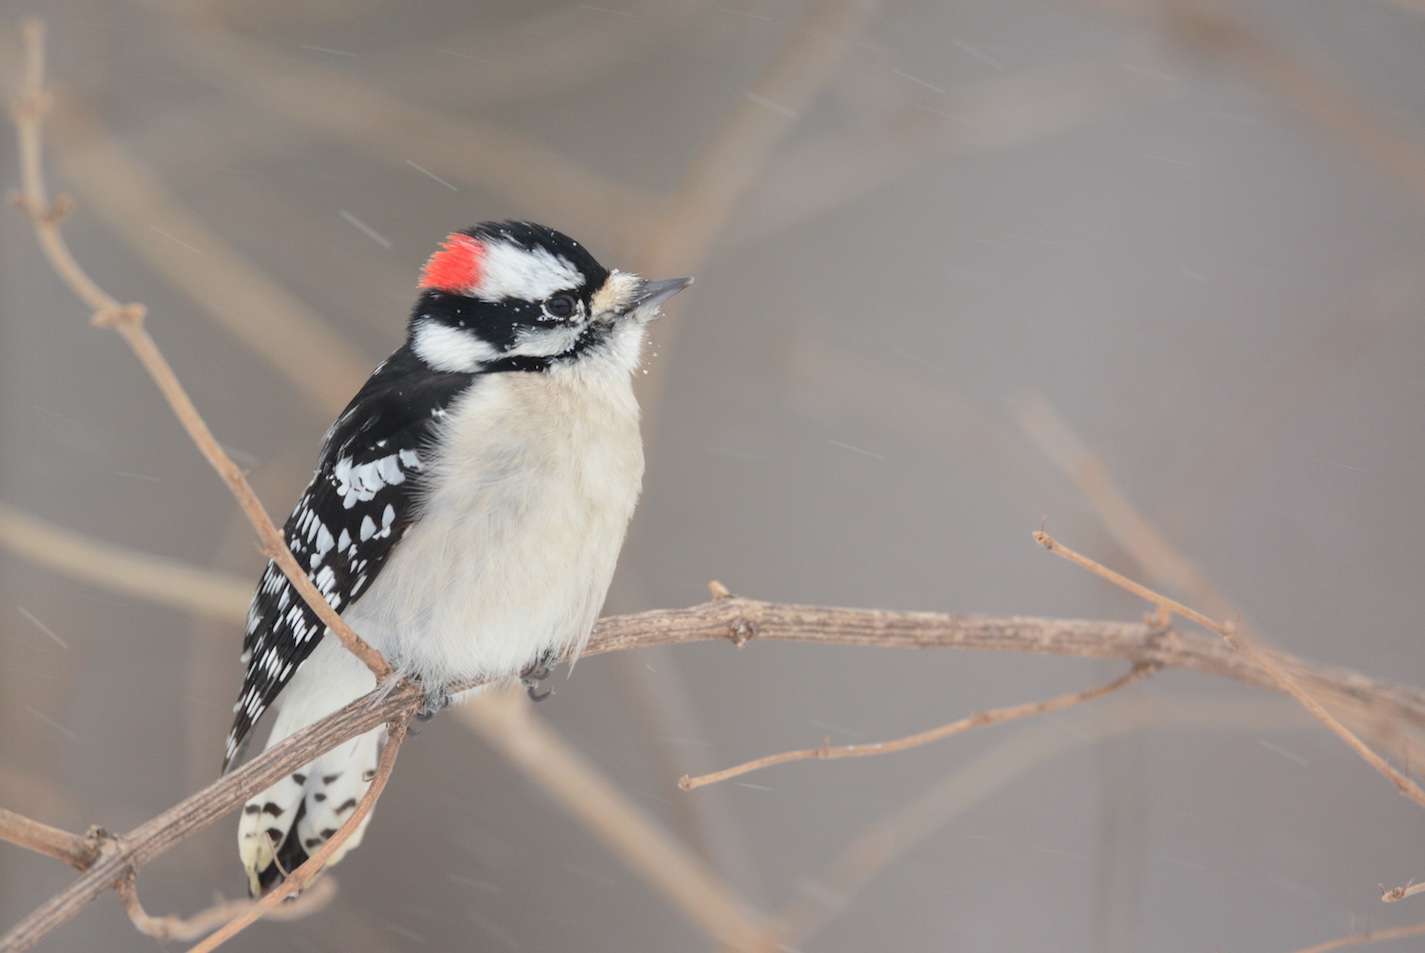 The red patch of feathers on the back of the head identifies this as a male Downy woodpecker.